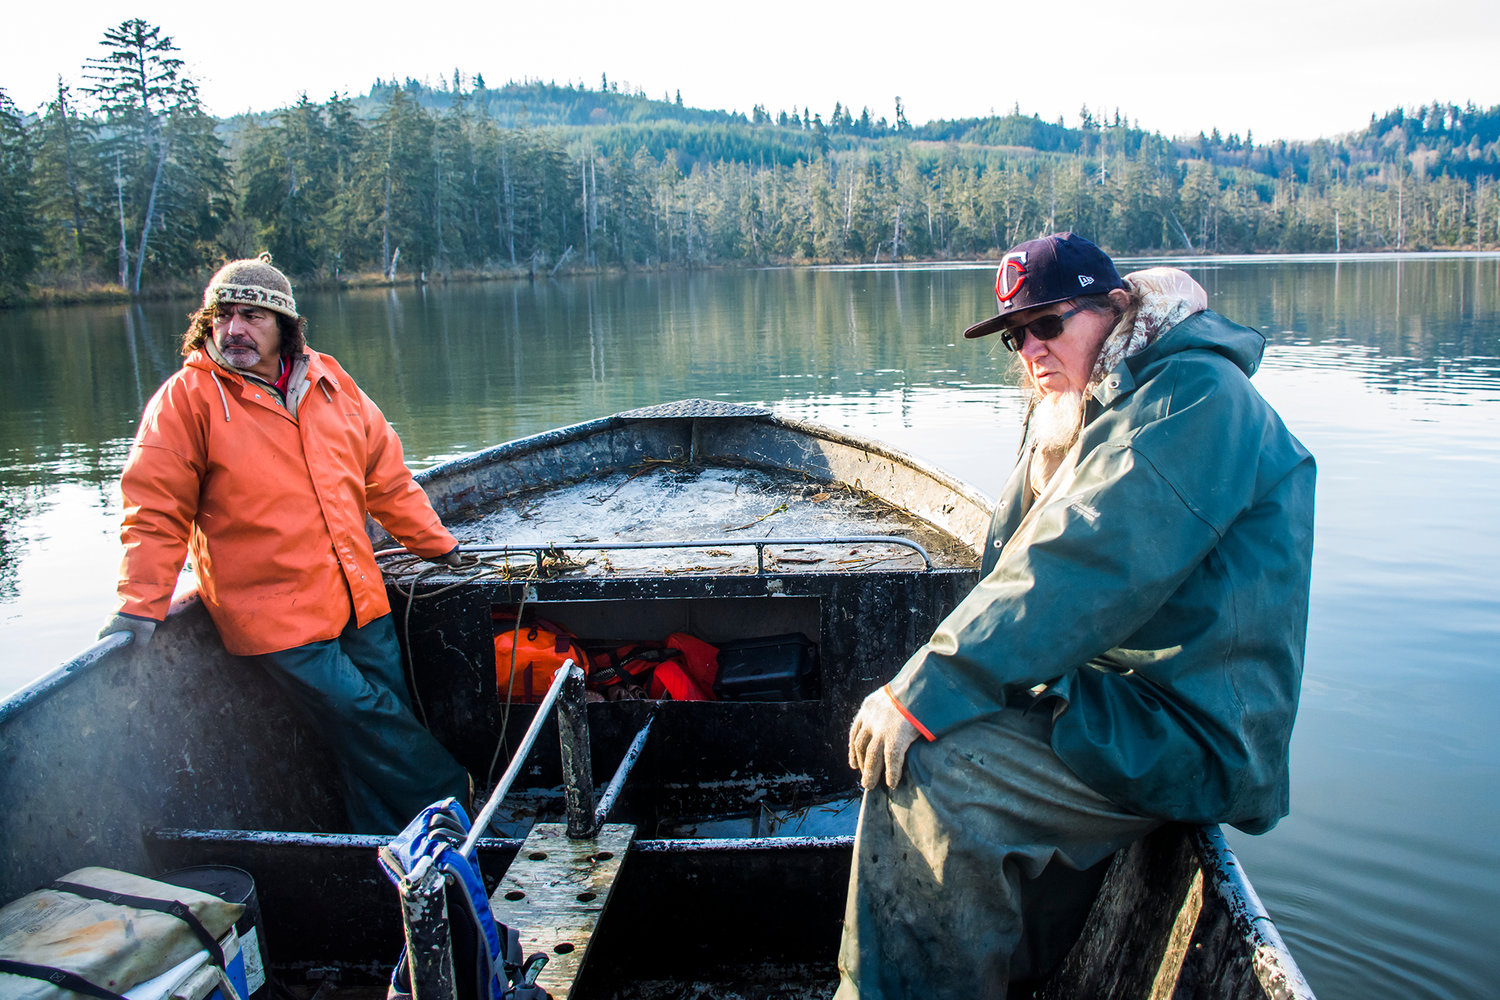 Ed Johnstone, right, fisheries policy spokesperson for the Quinault Indian Nation, and fishing partner Phillip "Dino" Blackburn, left, check nets on the Chehalis River Tuesday morning.